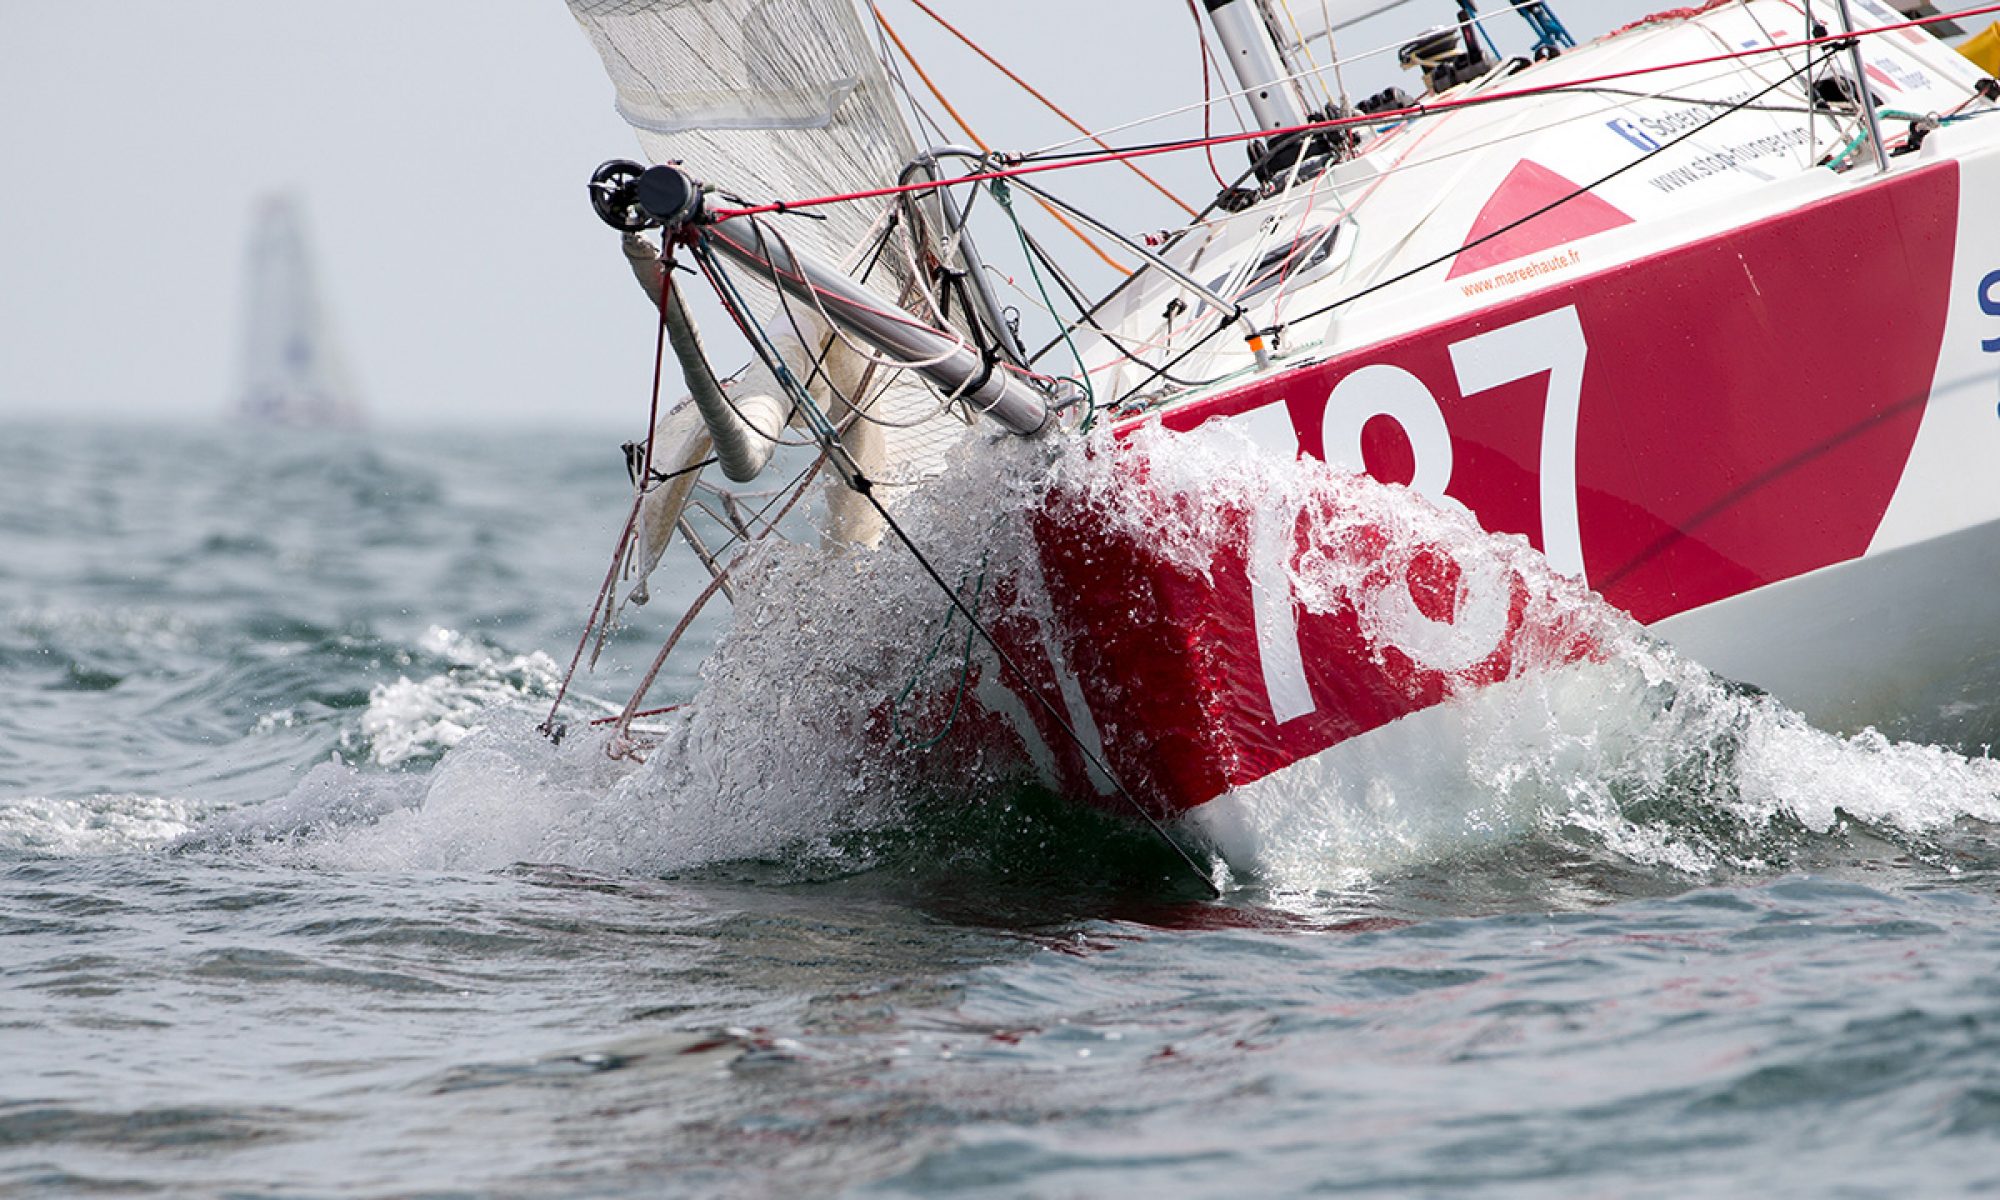  Class 40  Les SablesLes Acores  Leg 1  Day 5, leader change with Pourre/Luciani new on top